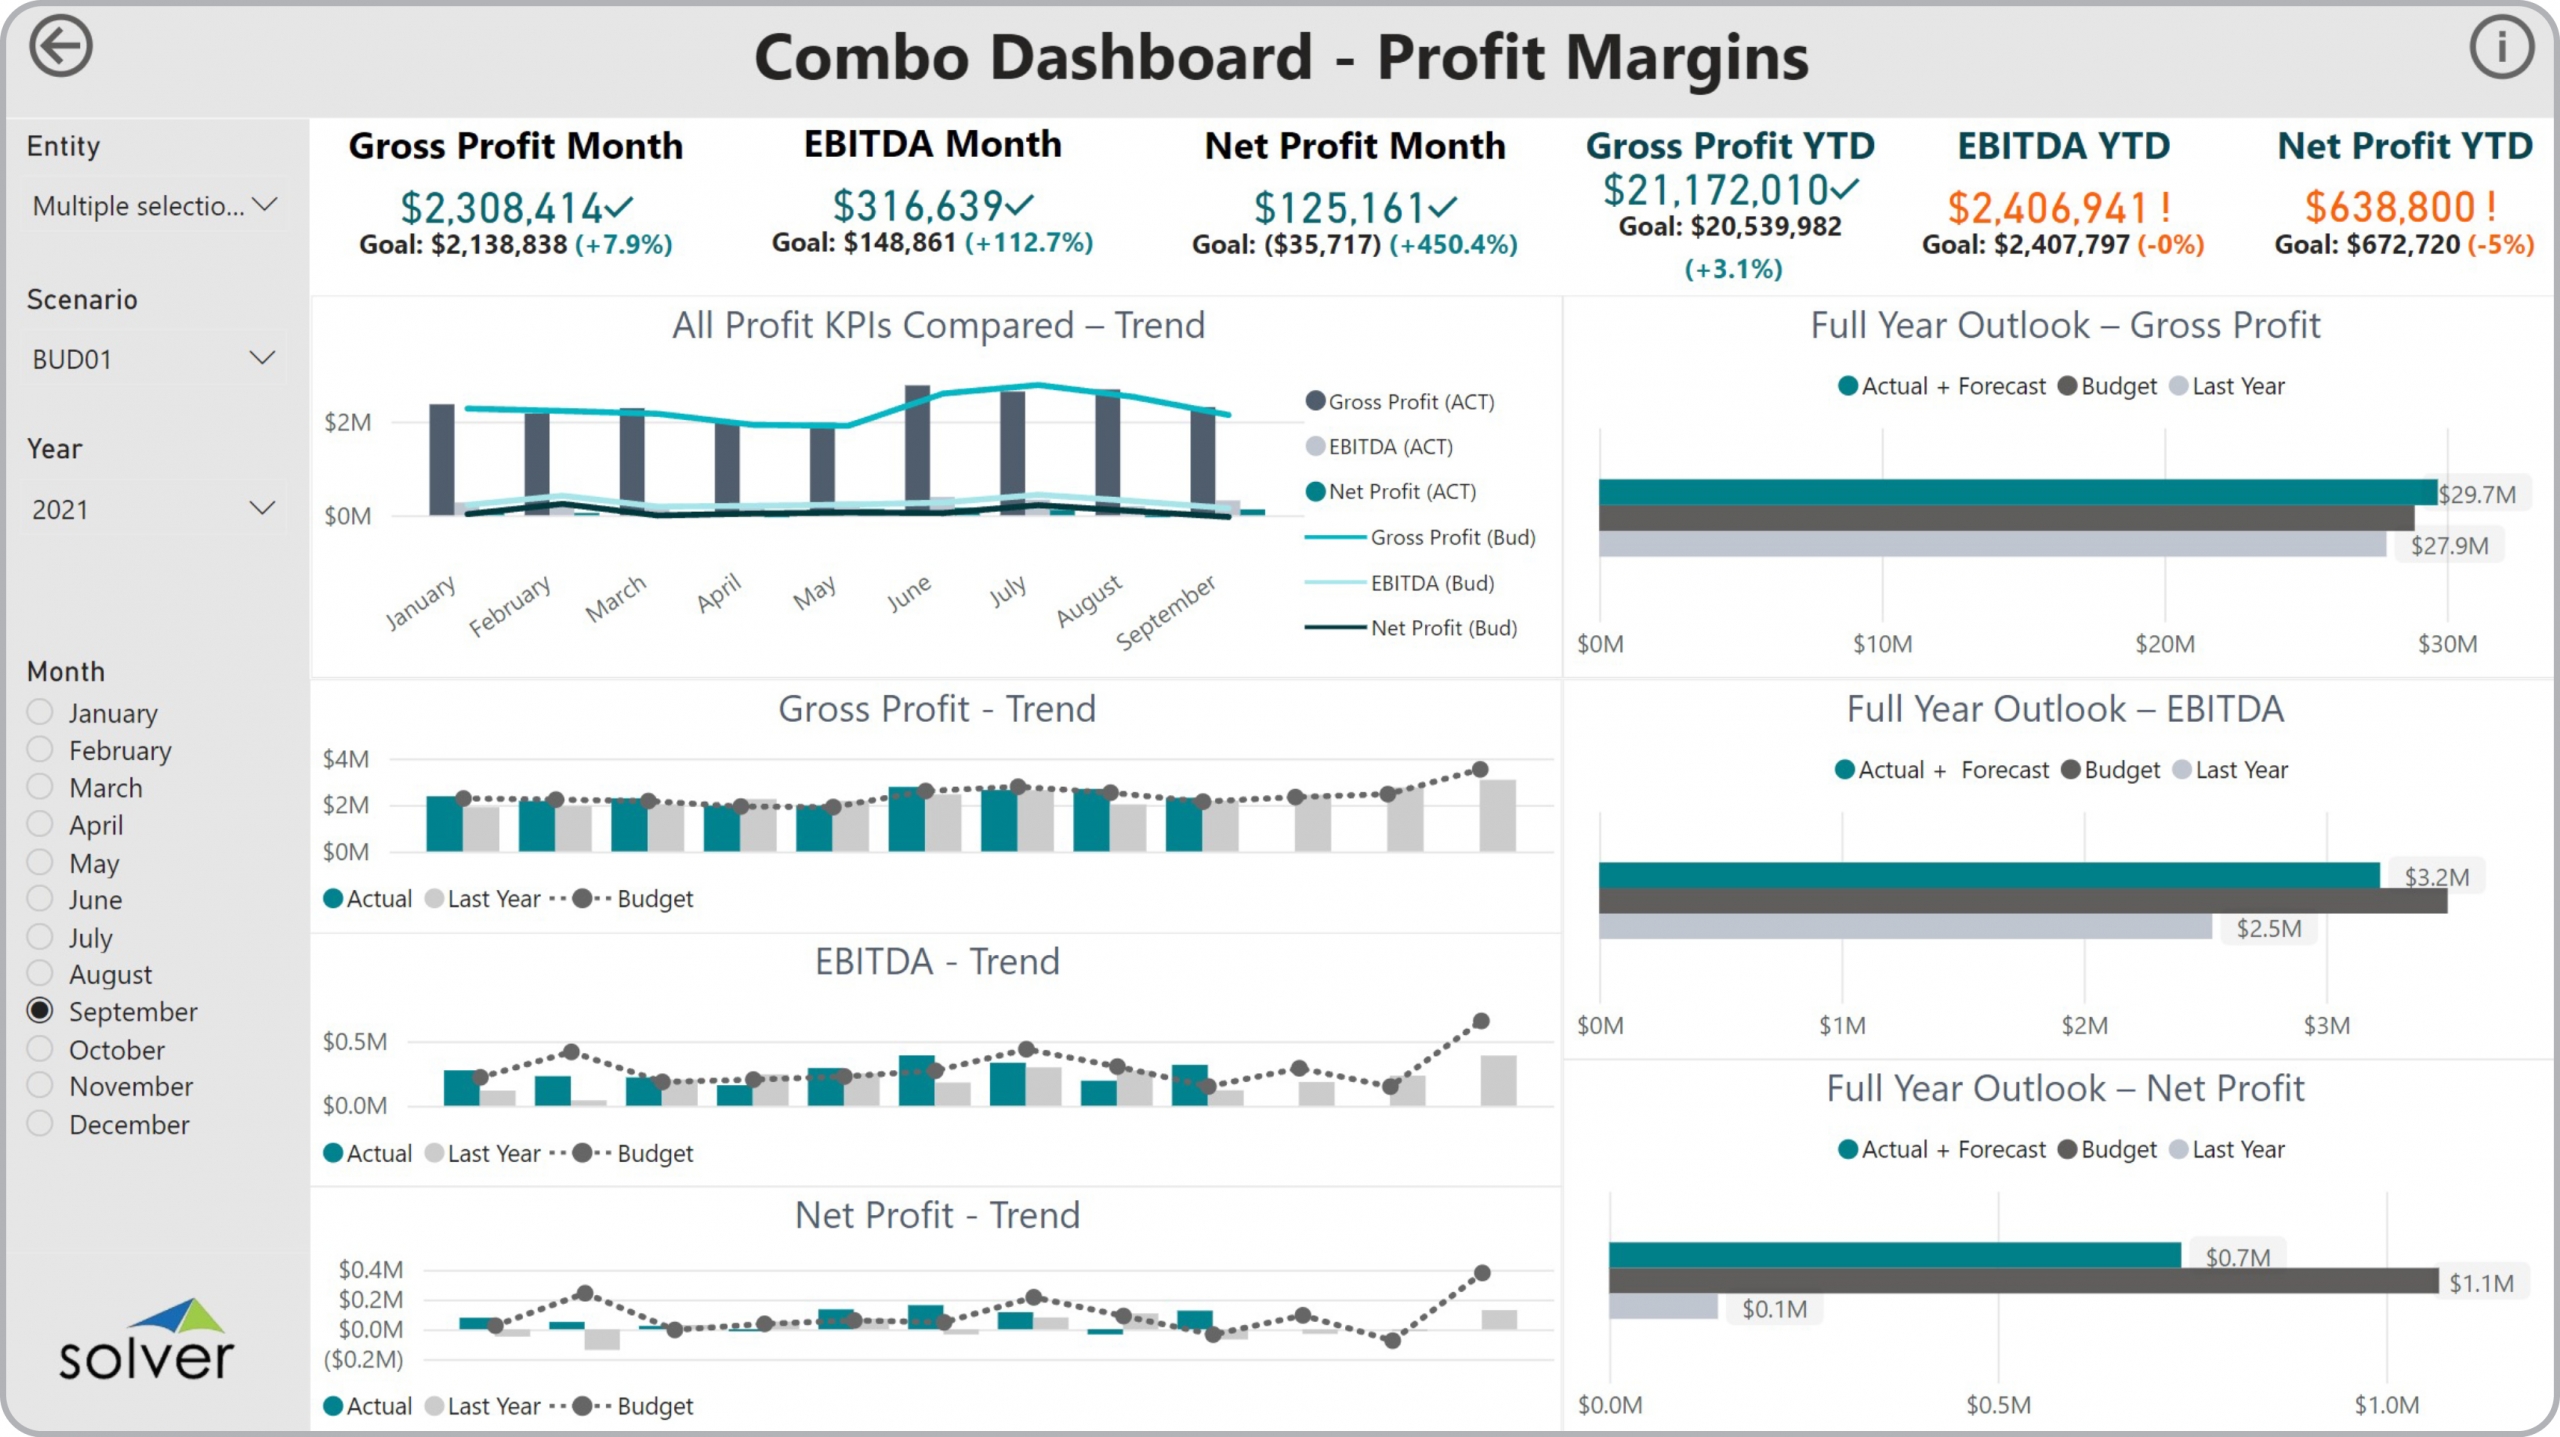 Example of a Profitability Dashboard with Trends and Variances to Streamline the Monthly Reporting Process